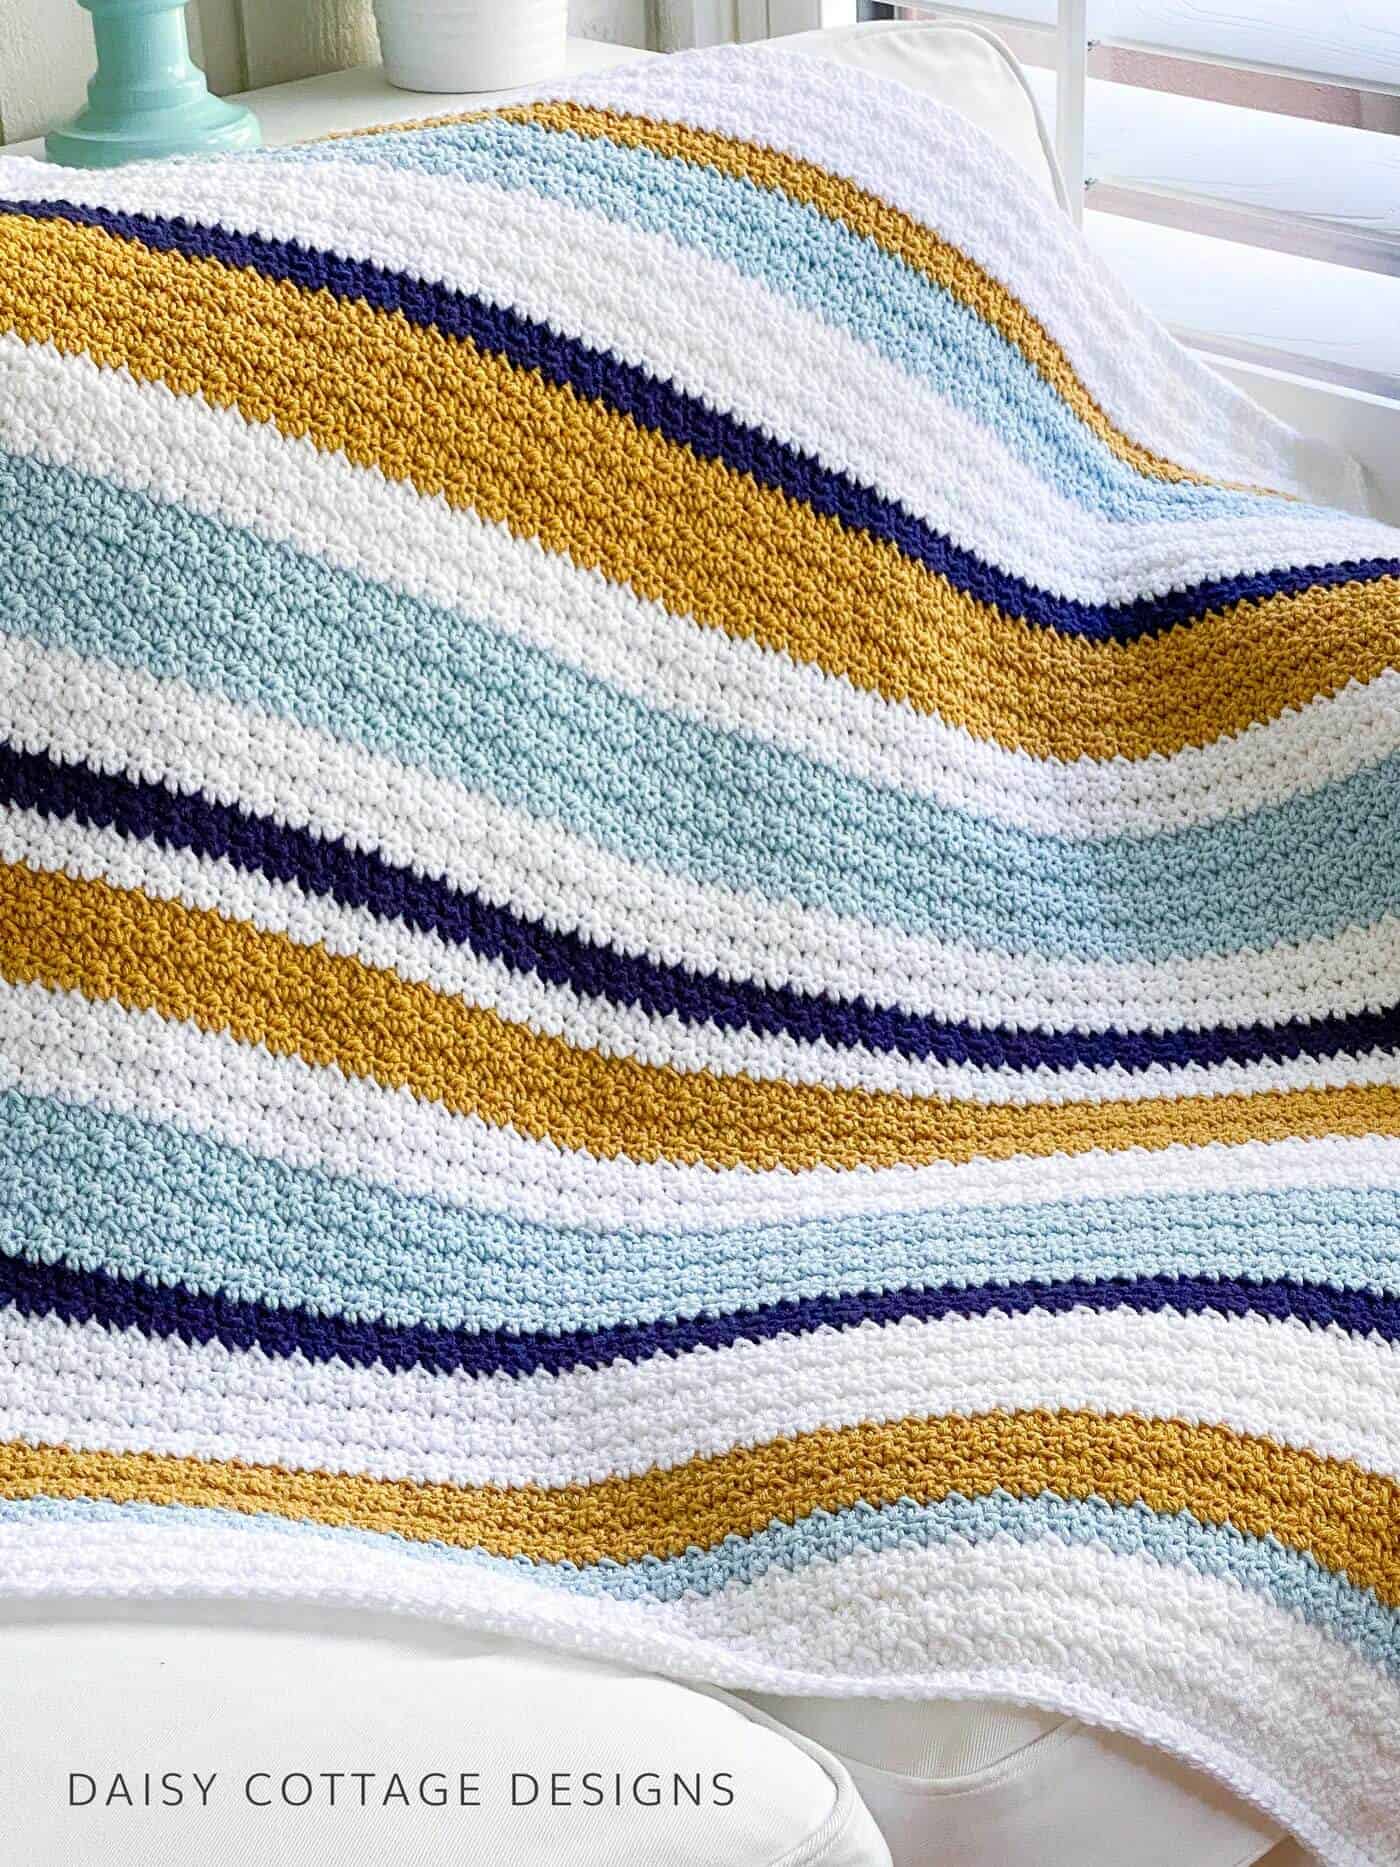 Use this Free Crochet Blanket Pattern from Daisy Cottage Designs to create your next beautiful blanket. 